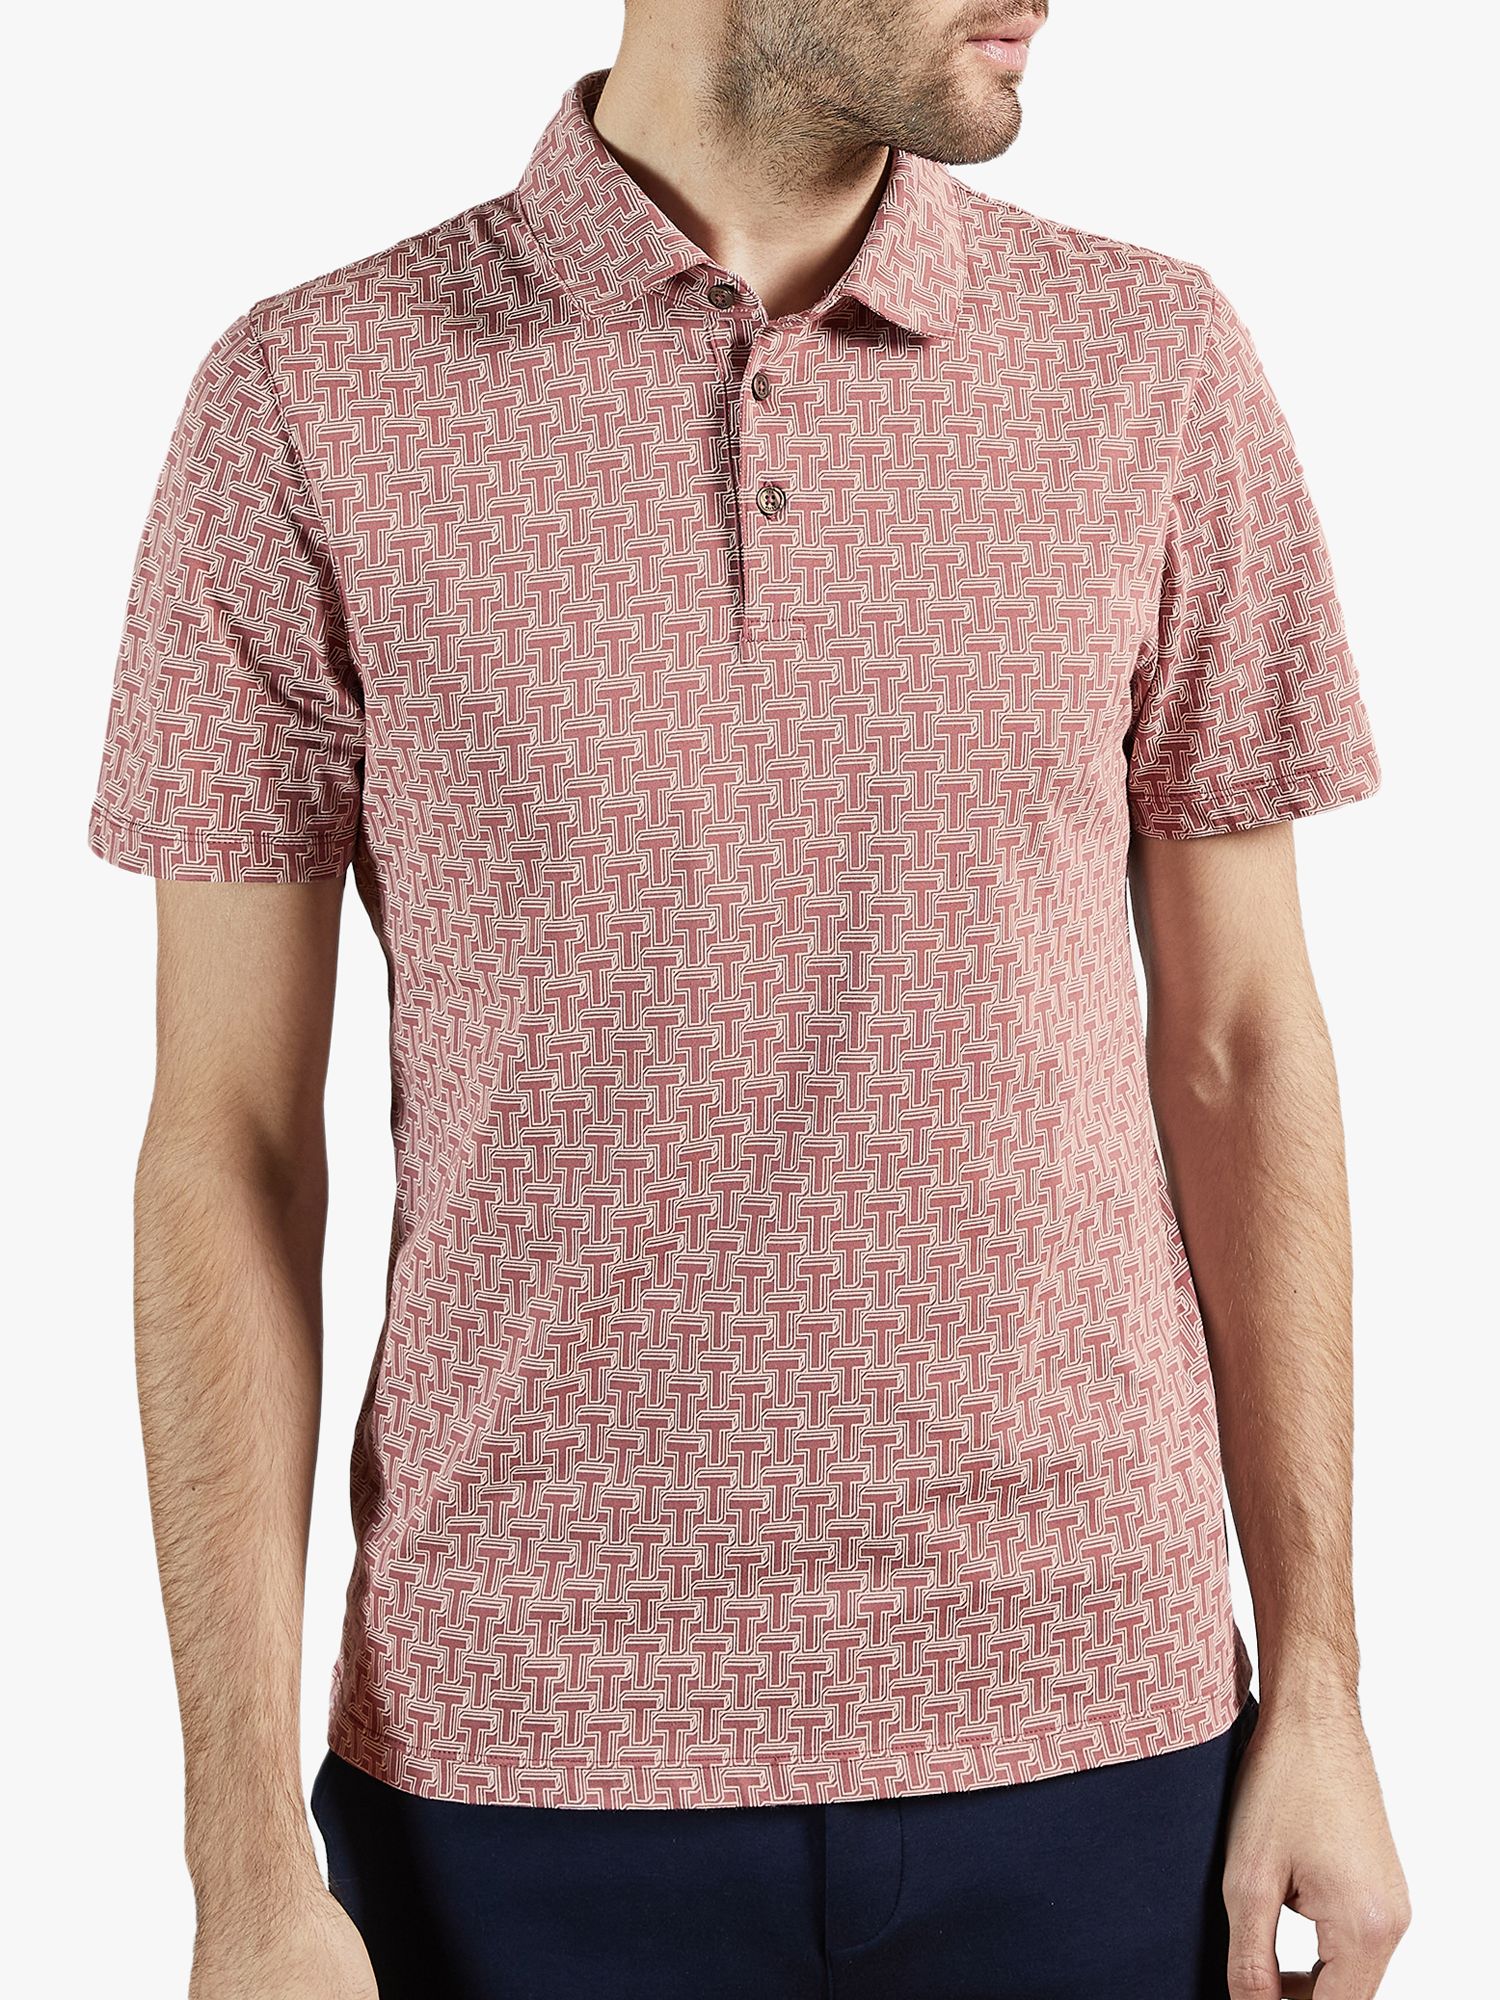 Ted Baker Tdawg Geo Print Polo Shirt